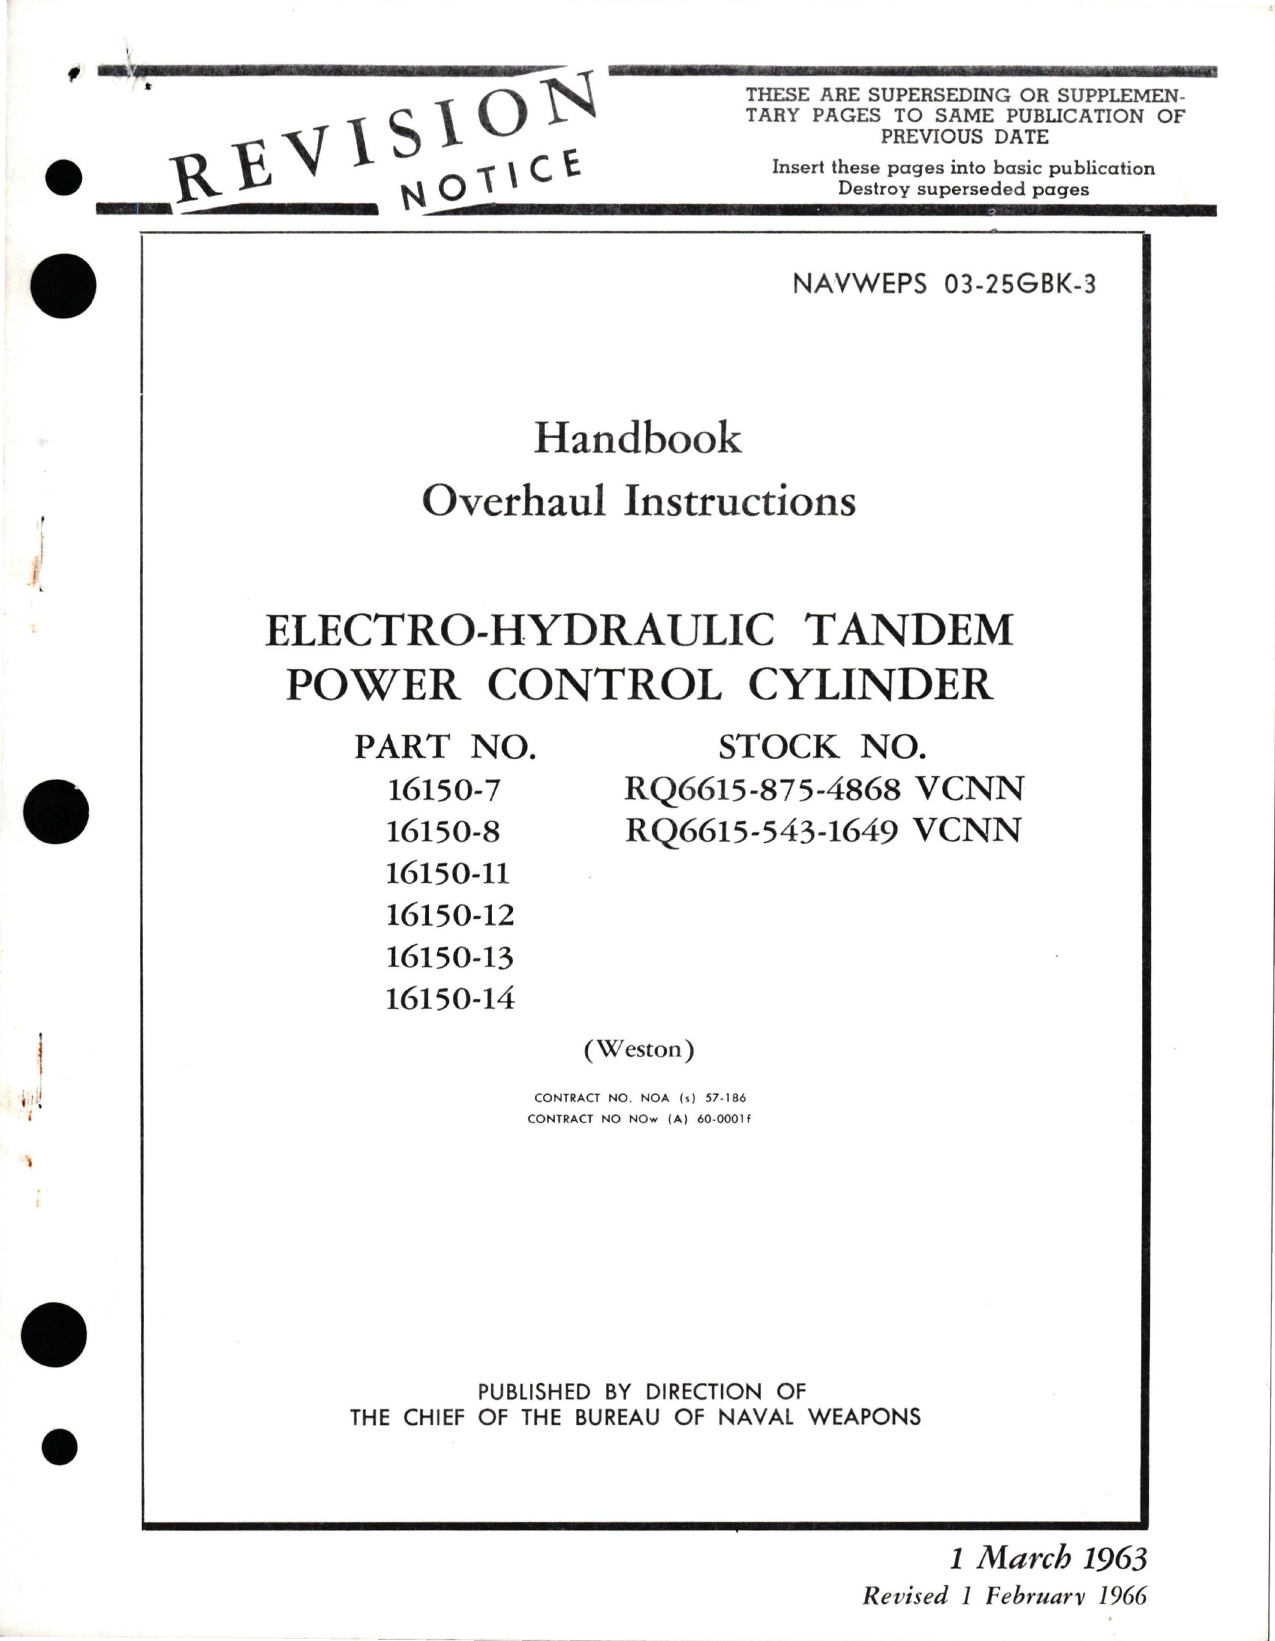 Sample page 1 from AirCorps Library document: Overhaul Instructions for Electro-Hydraulic Tandem Power Control Cylinder - Parts 16150-7, 16150-8, 16150-11, 16150-12, 16150-13, and 16150-14